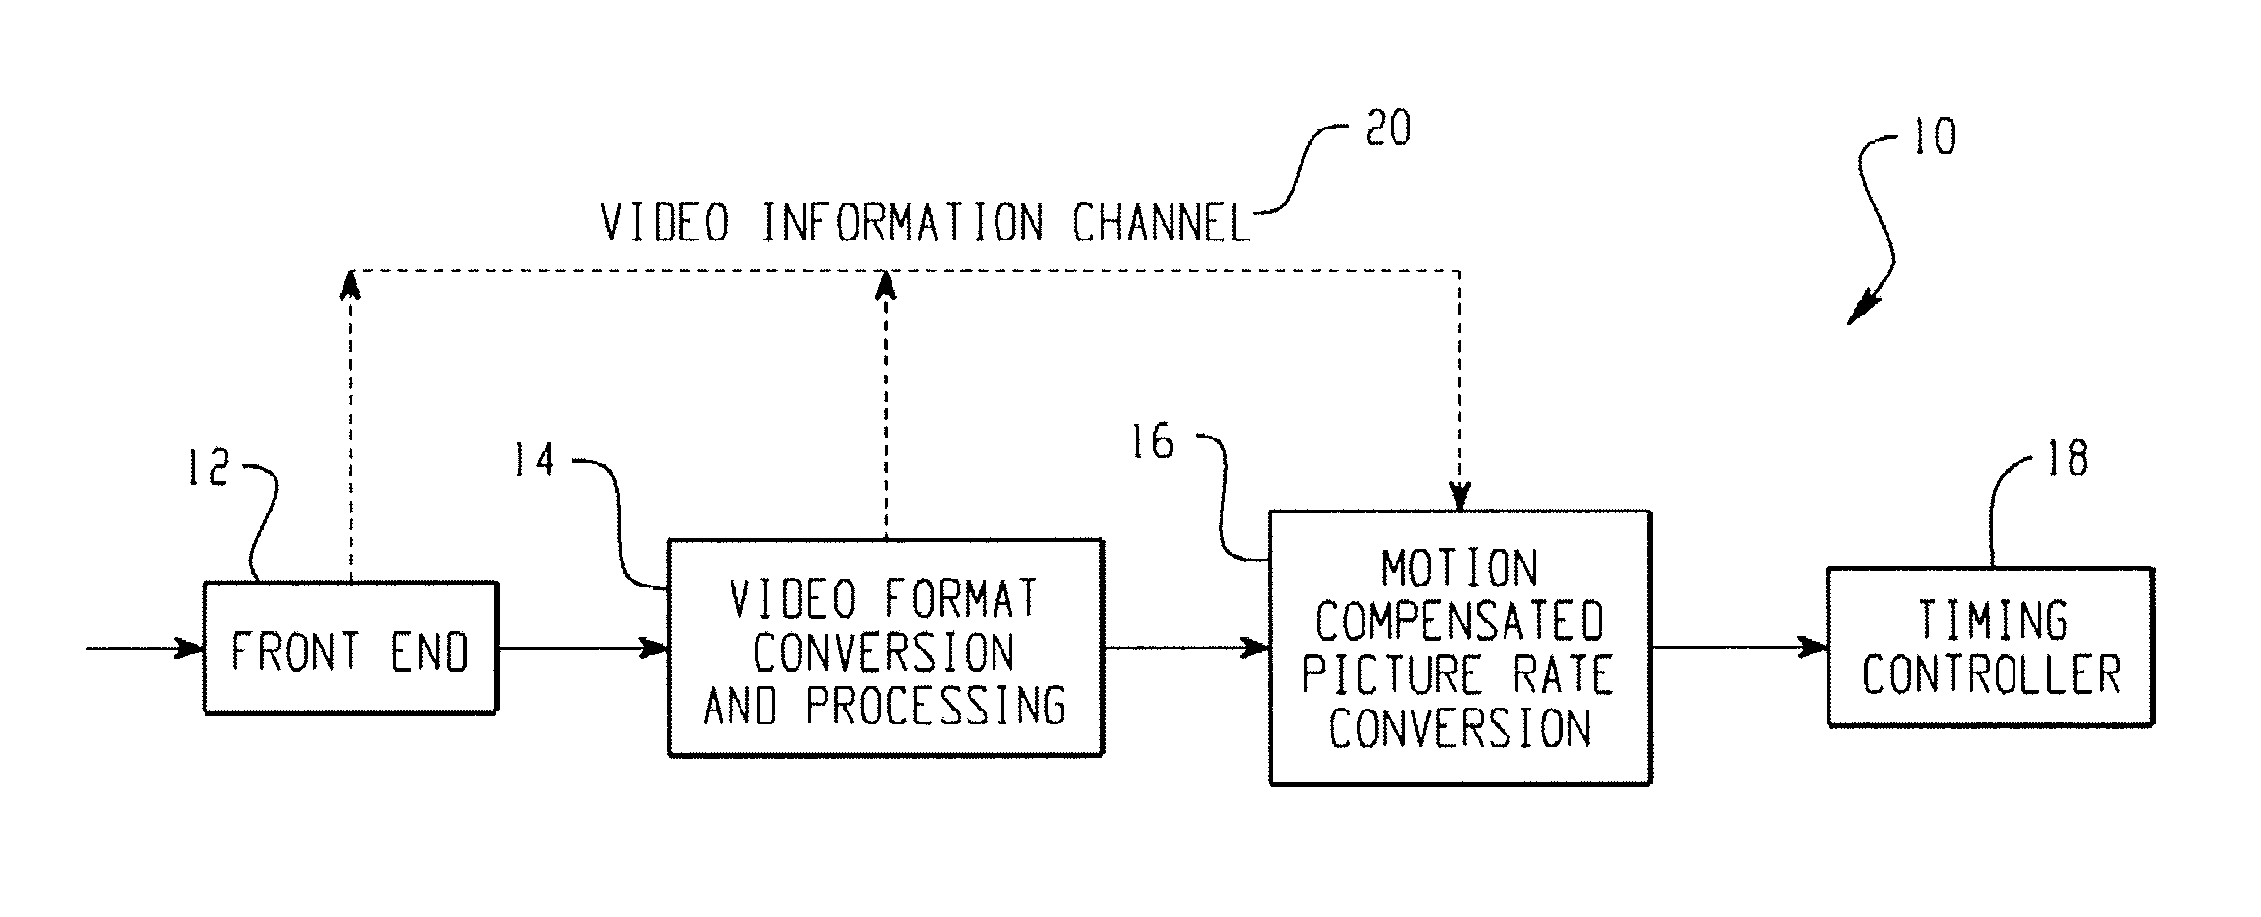 Picture rate conversion system architecture